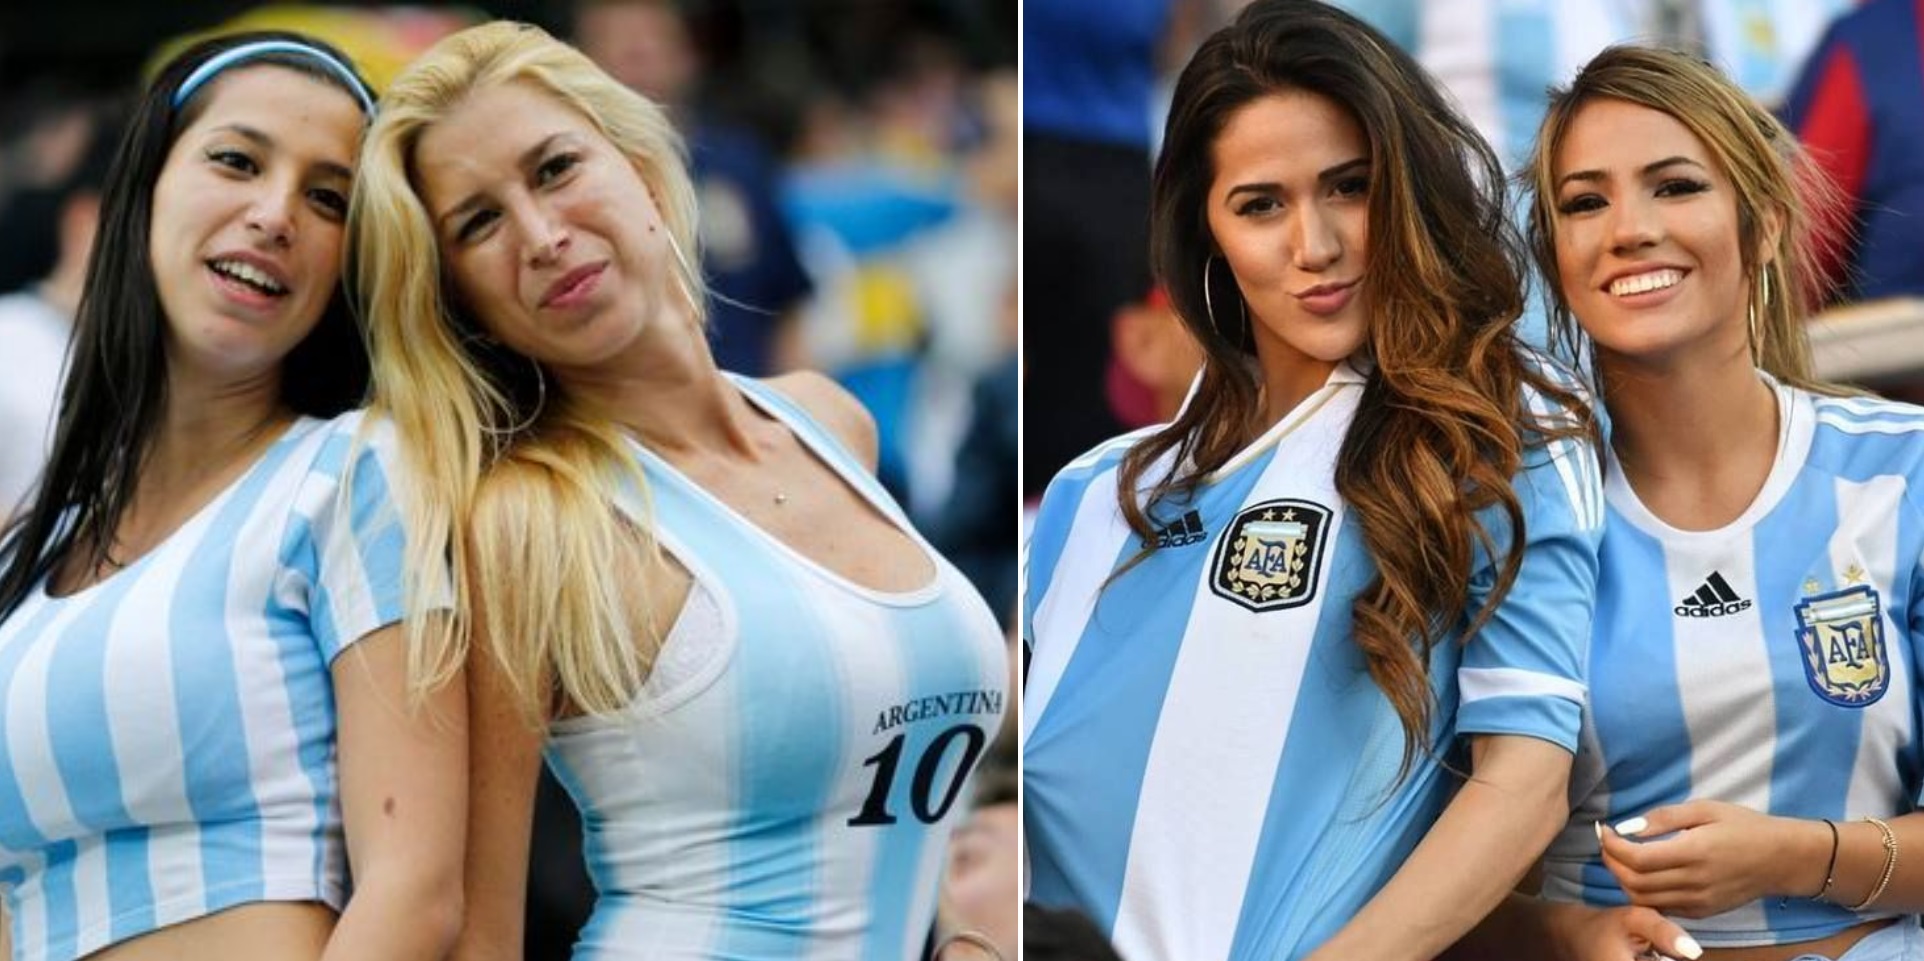 Argentina Female Football Fans Hottest